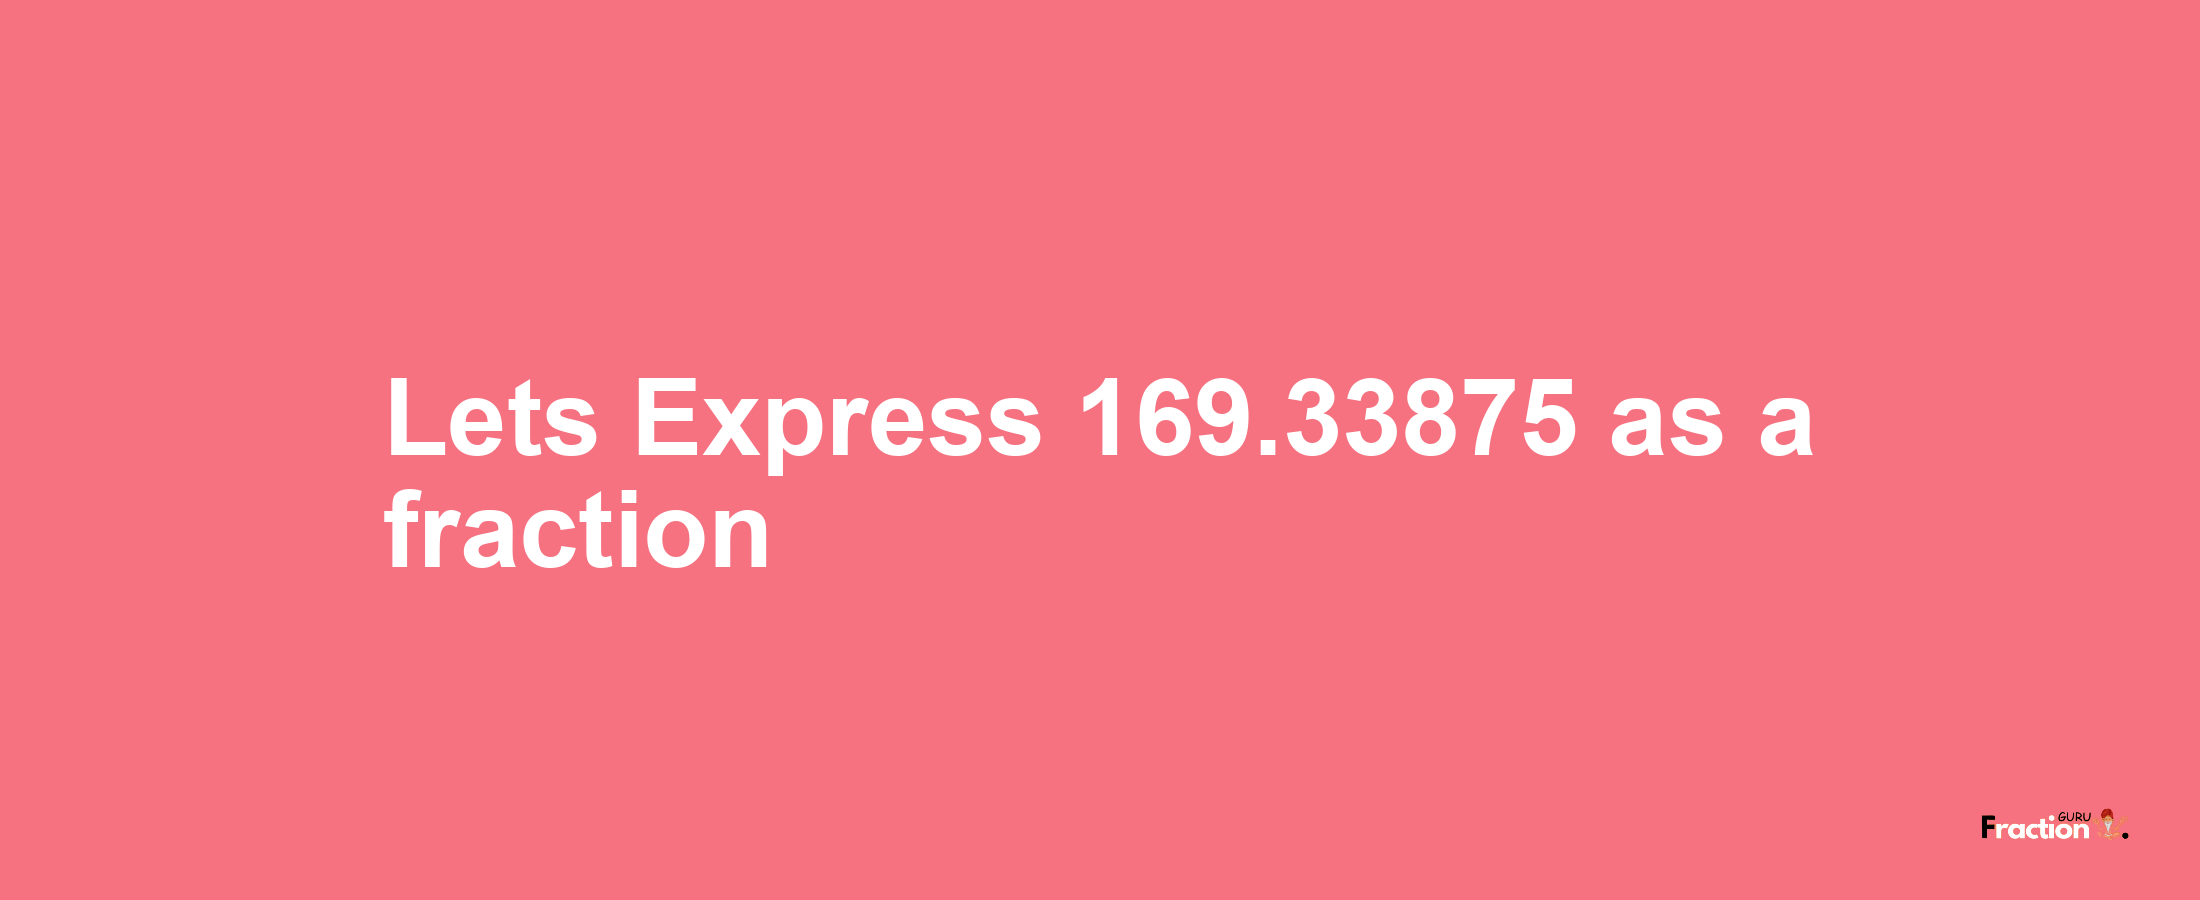 Lets Express 169.33875 as afraction